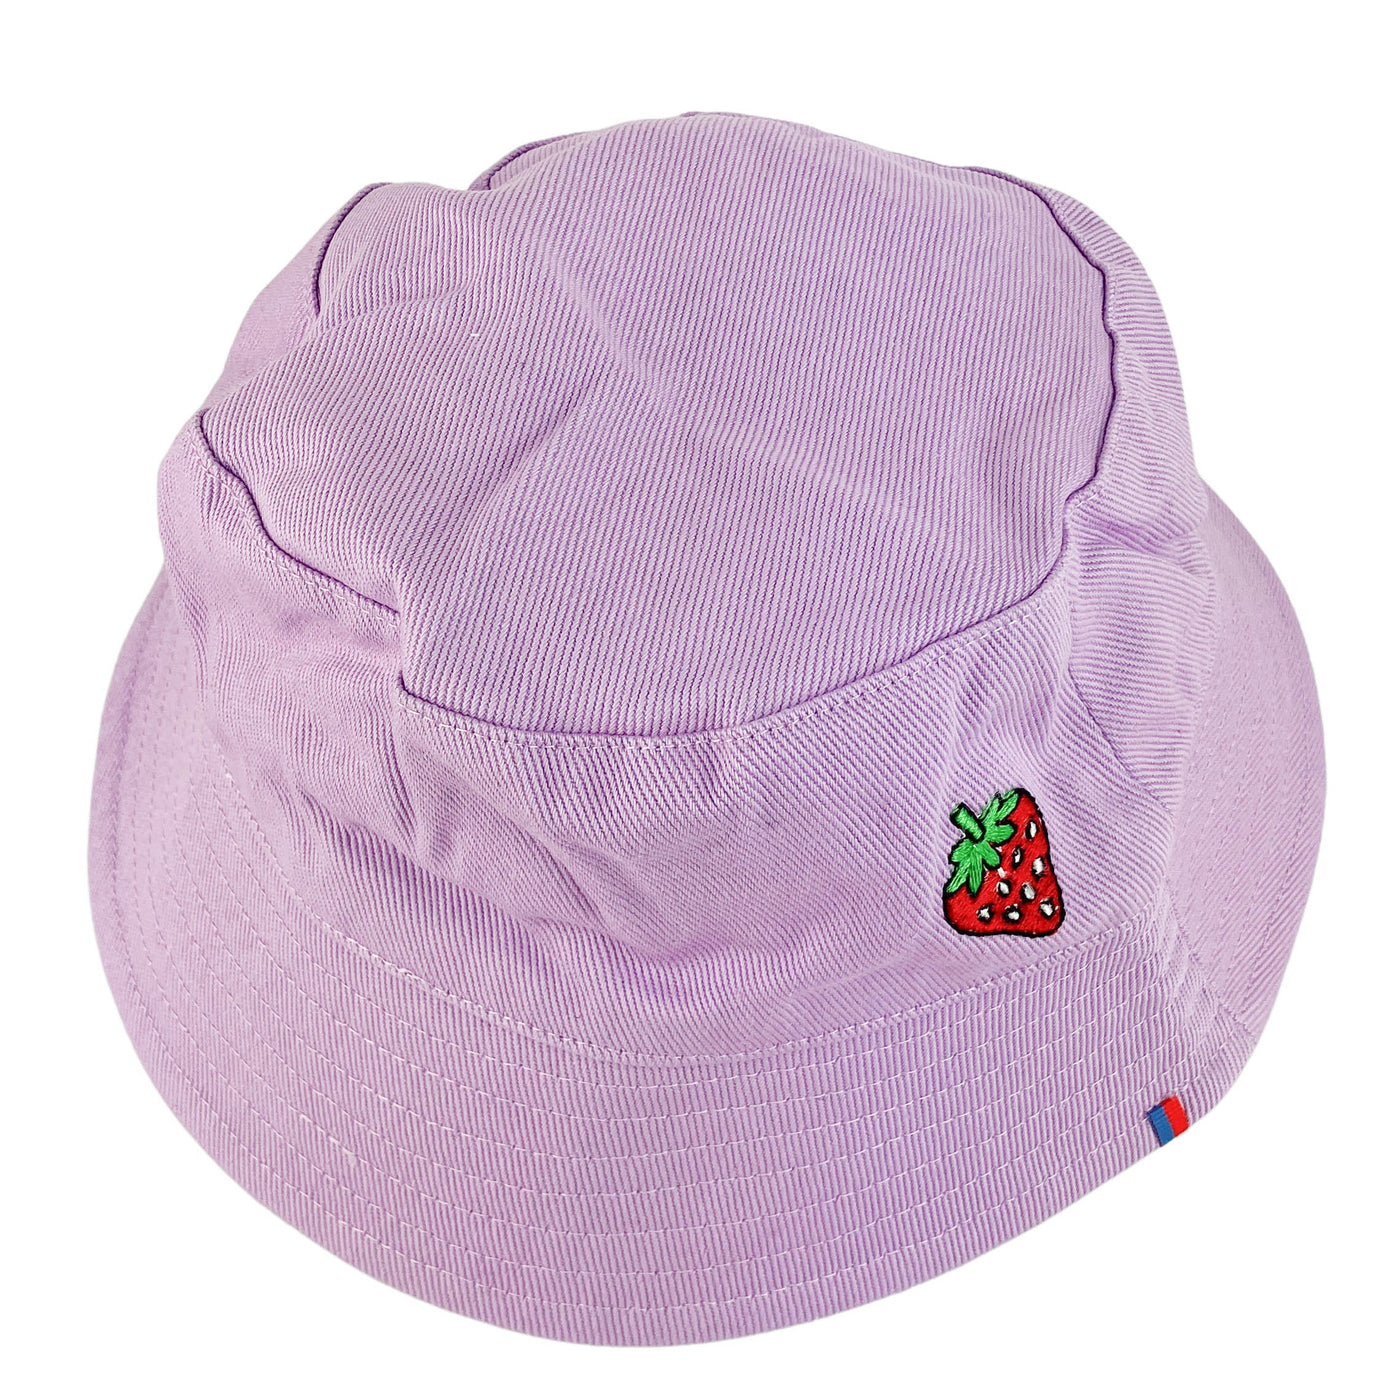 Kule Strawberry Embroidered Bucket Hat - Discounts on Kule at UAL